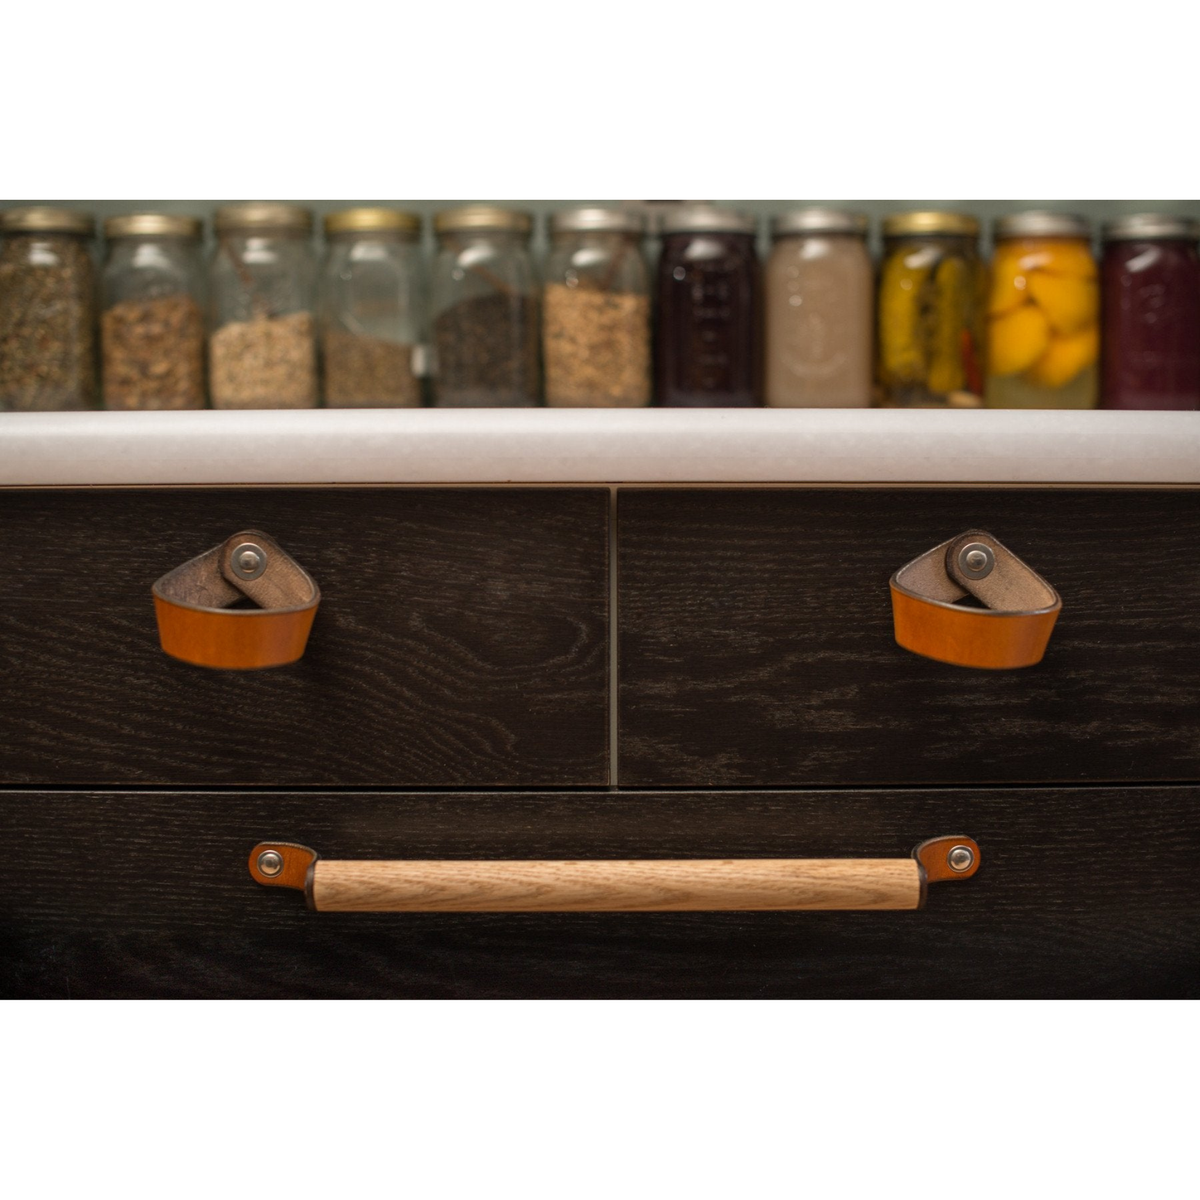 Photo showing the large Sellwood white oak handle against two small drawers with Fremont leather loop handles in honey on dark brown cabinetry